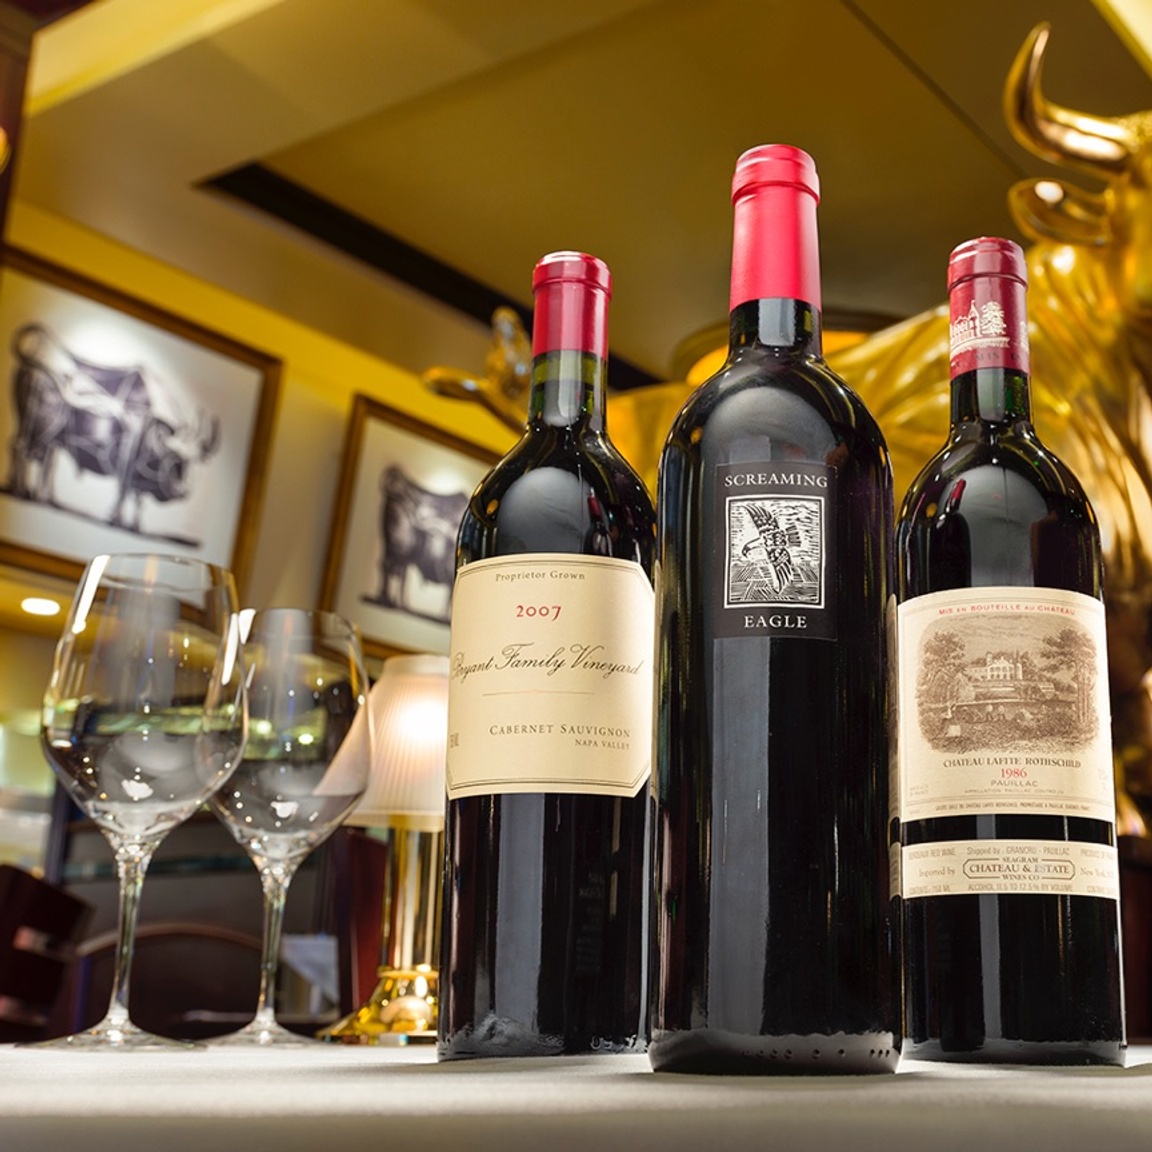 Steakhouse wine list selection at 801 Chophouse